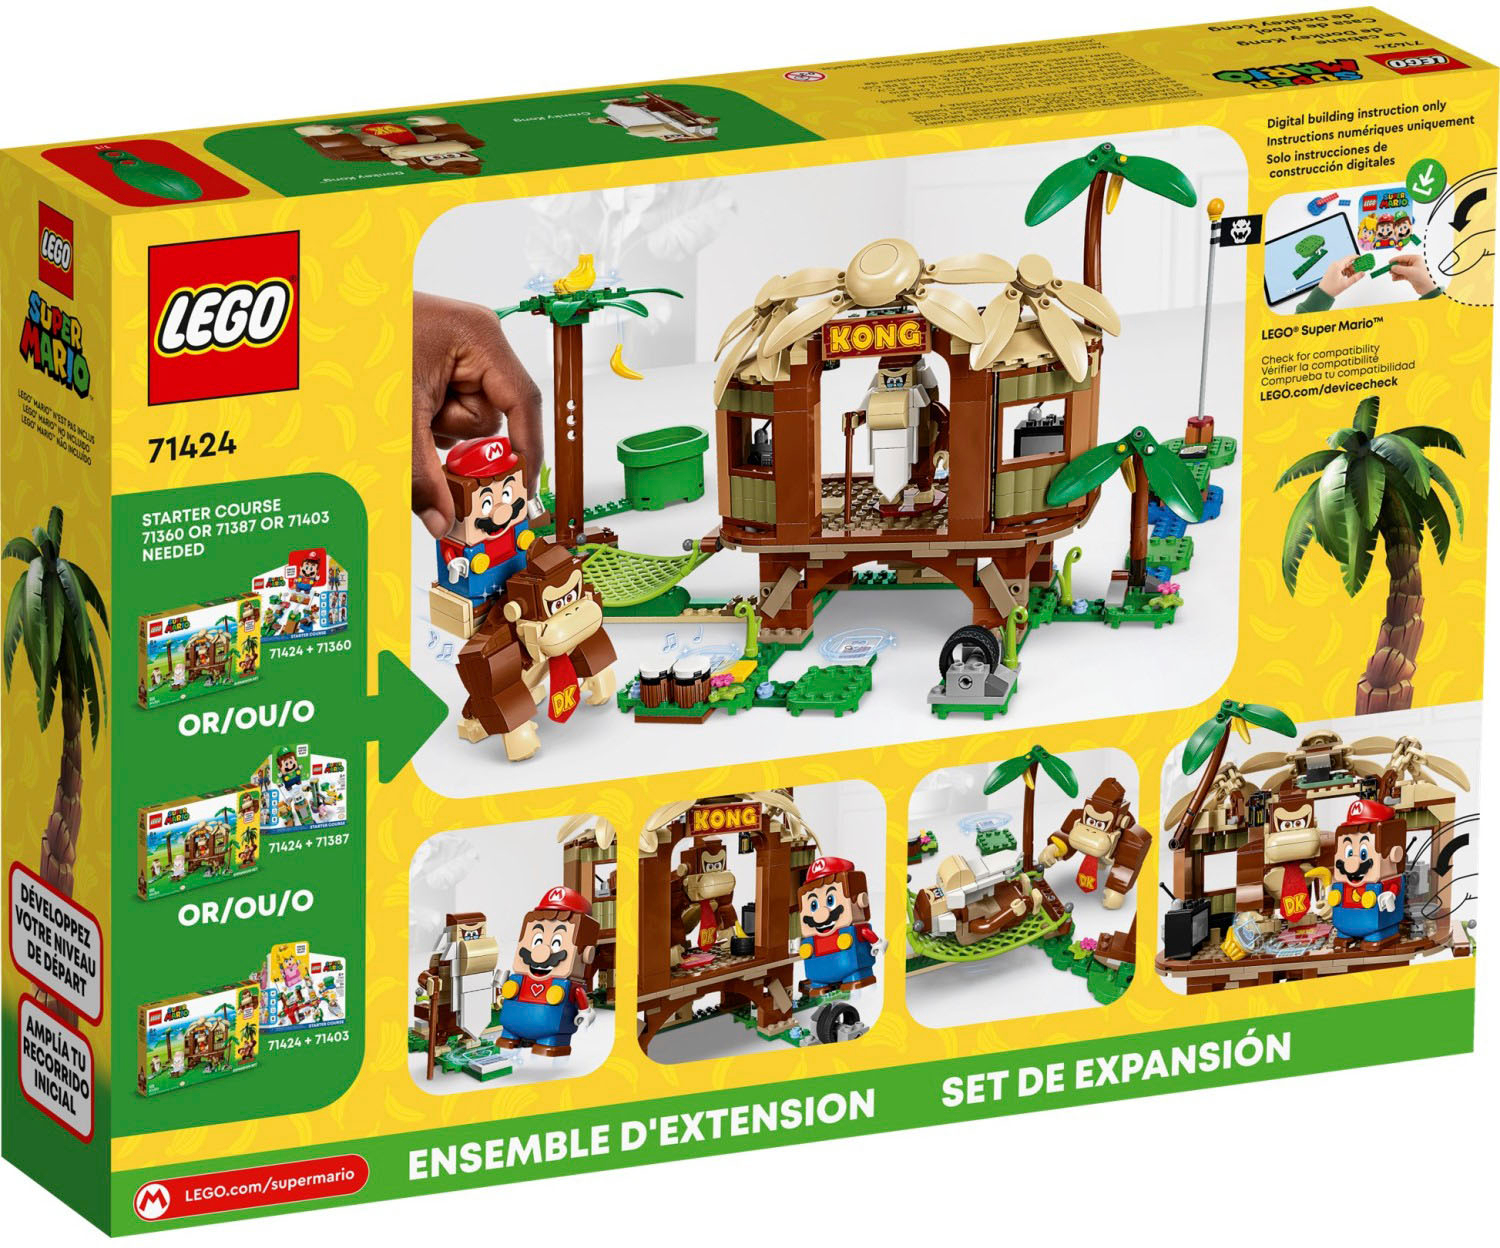 The New Donkey Kong And Sonic Lego Sets Are On Sale At  - GameSpot